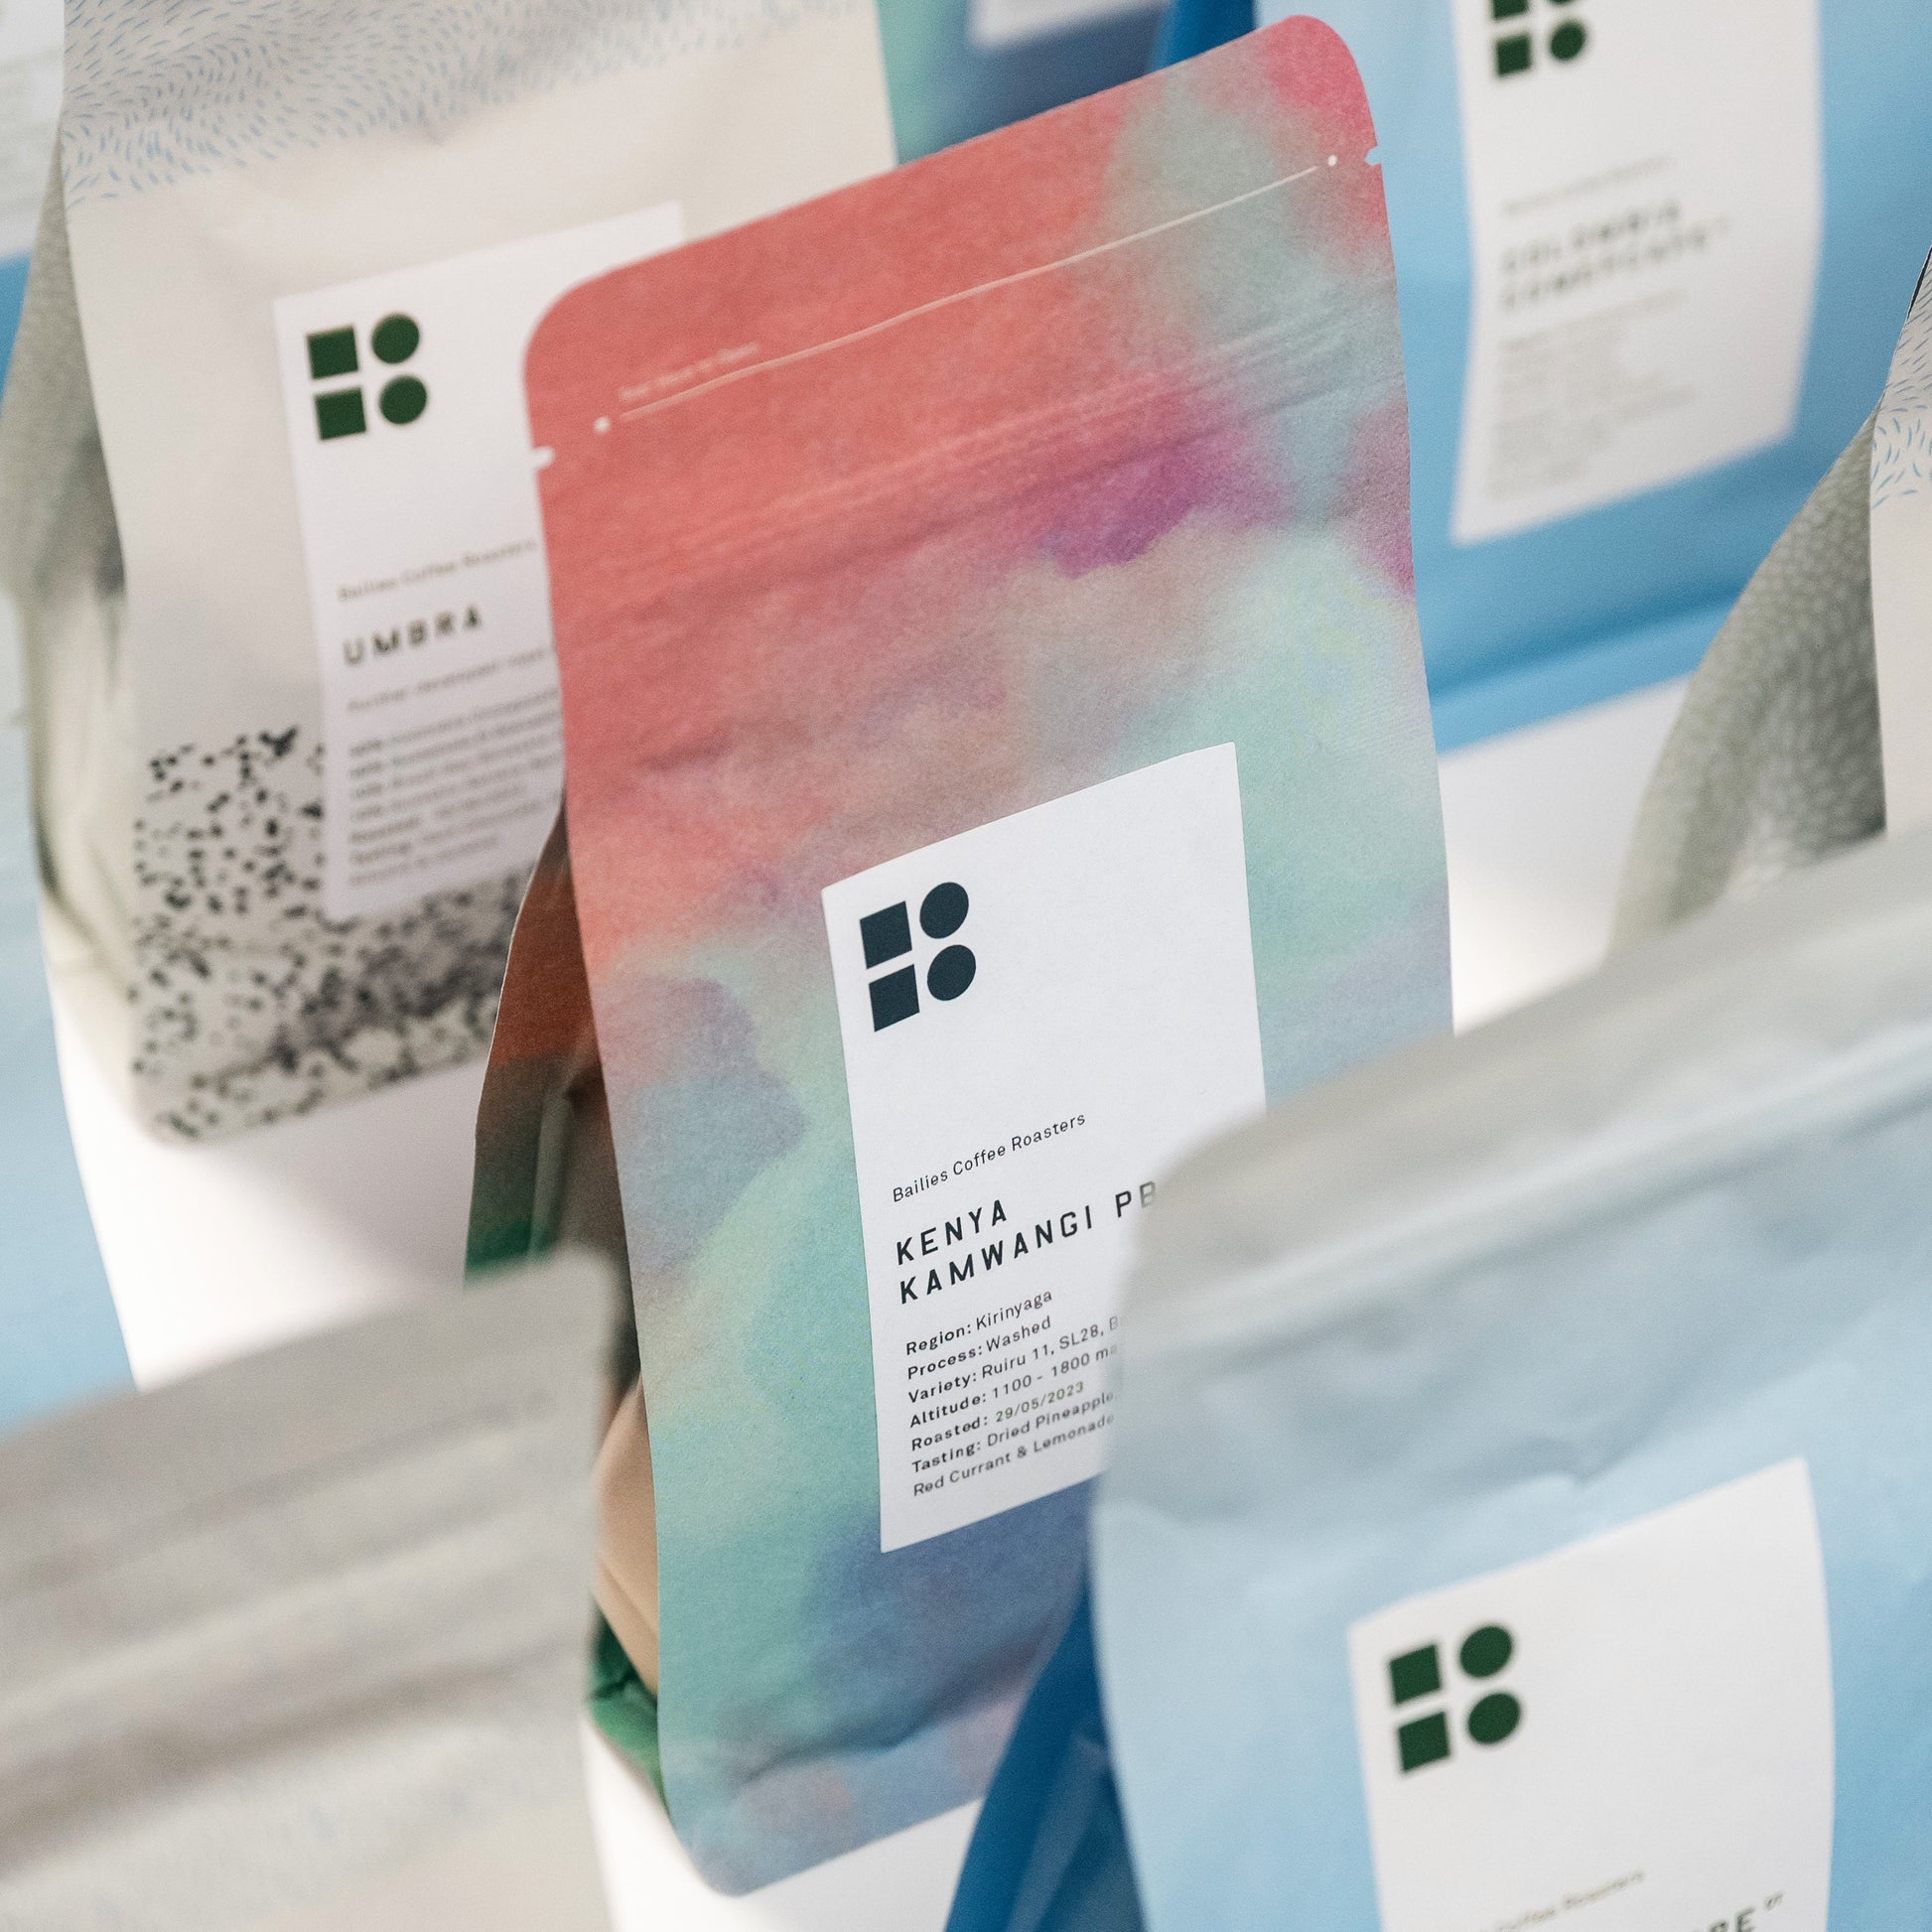 Microlot Subscription : Free Delivery - Bailies Coffee Roasters